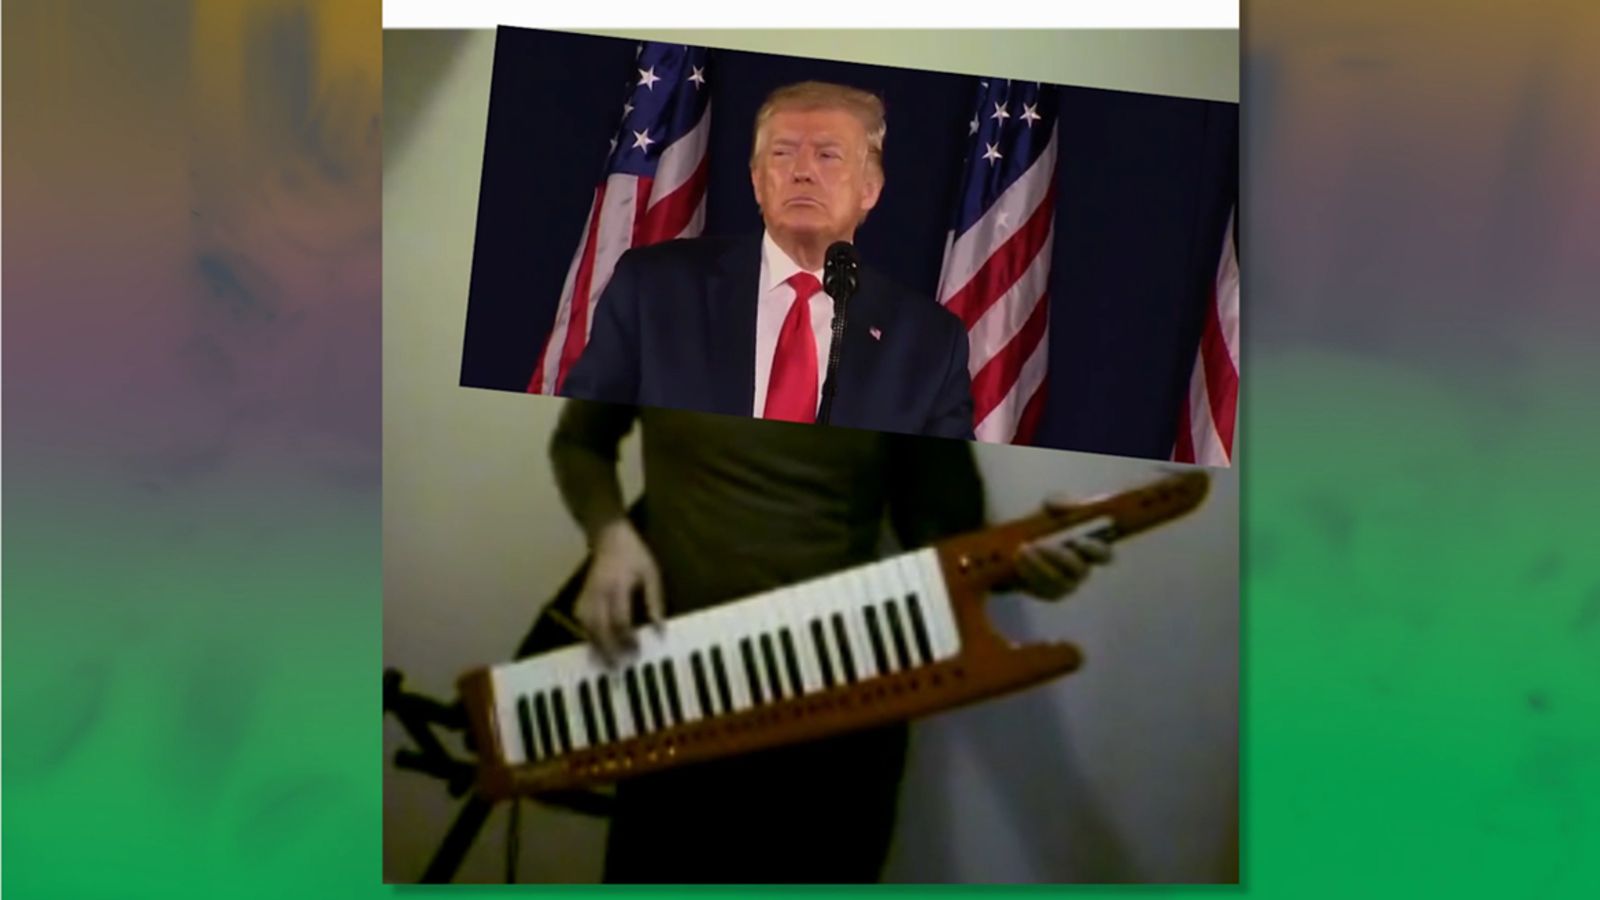 A doctored image of Donald Trump playing the keyboard